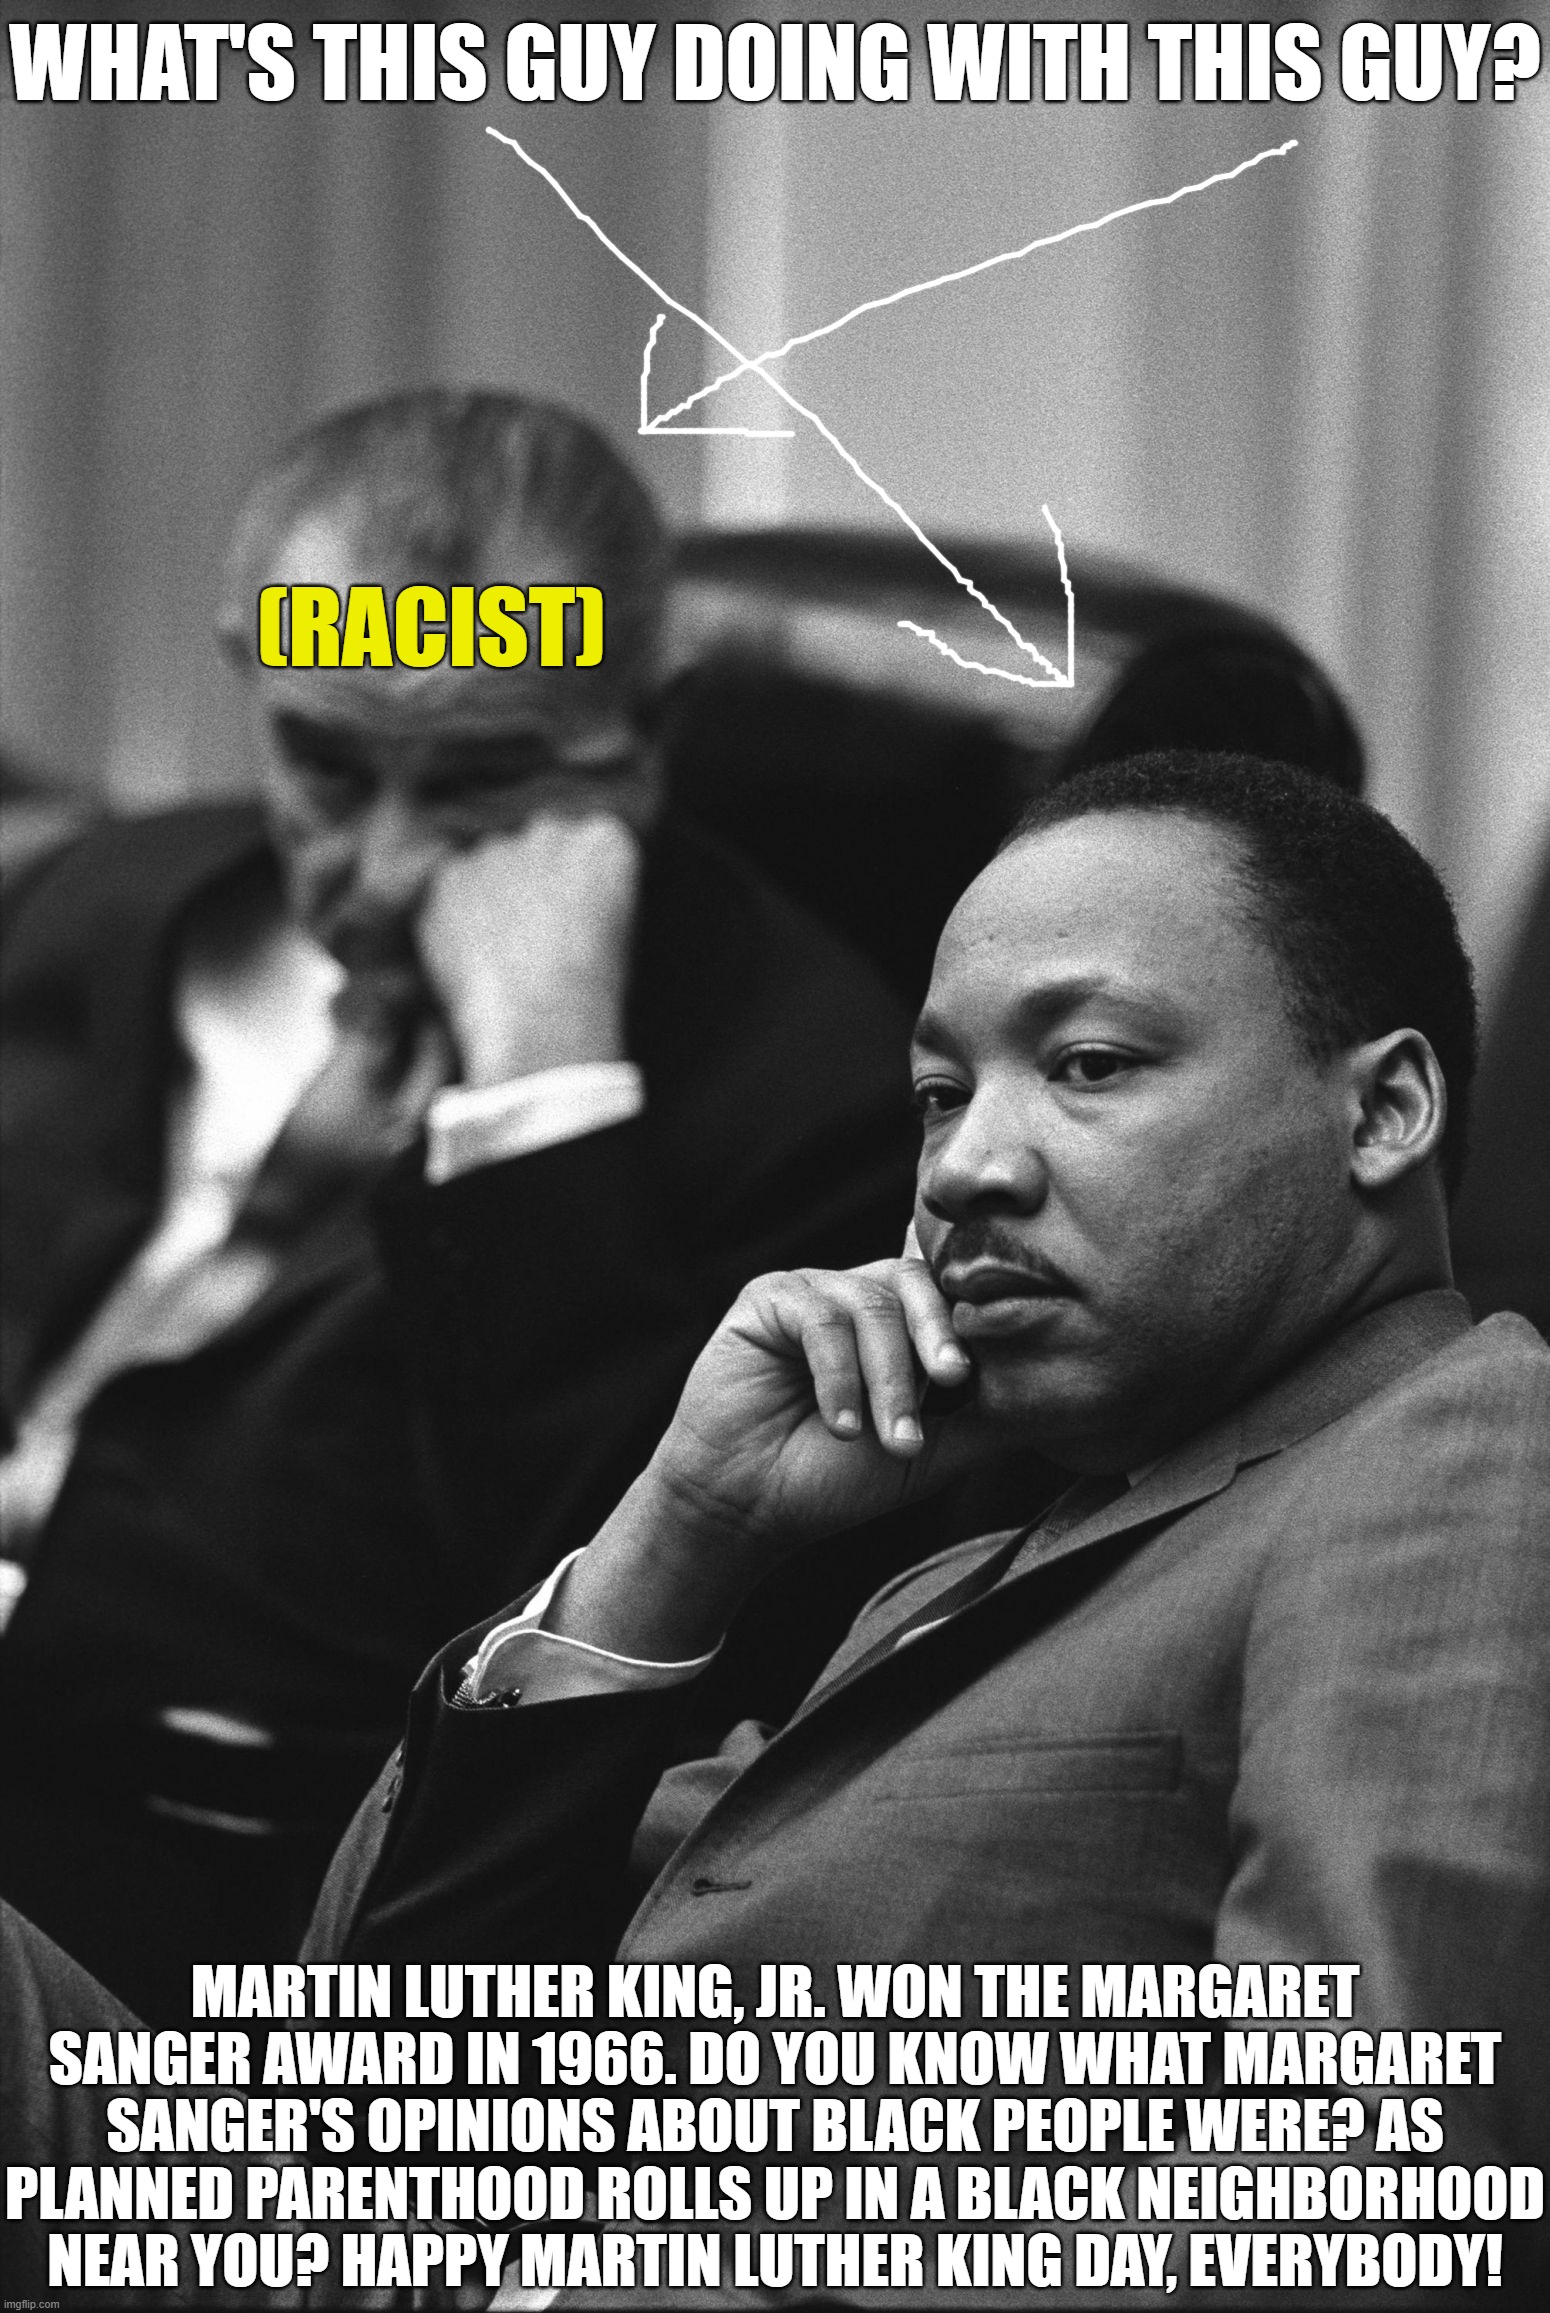 Martin Luther King Loves Racists | WHAT'S THIS GUY DOING WITH THIS GUY? (RACIST); MARTIN LUTHER KING, JR. WON THE MARGARET SANGER AWARD IN 1966. DO YOU KNOW WHAT MARGARET SANGER'S OPINIONS ABOUT BLACK PEOPLE WERE? AS PLANNED PARENTHOOD ROLLS UP IN A BLACK NEIGHBORHOOD NEAR YOU? HAPPY MARTIN LUTHER KING DAY, EVERYBODY! | image tagged in martin luther king jr quote,racist,bullshit | made w/ Imgflip meme maker